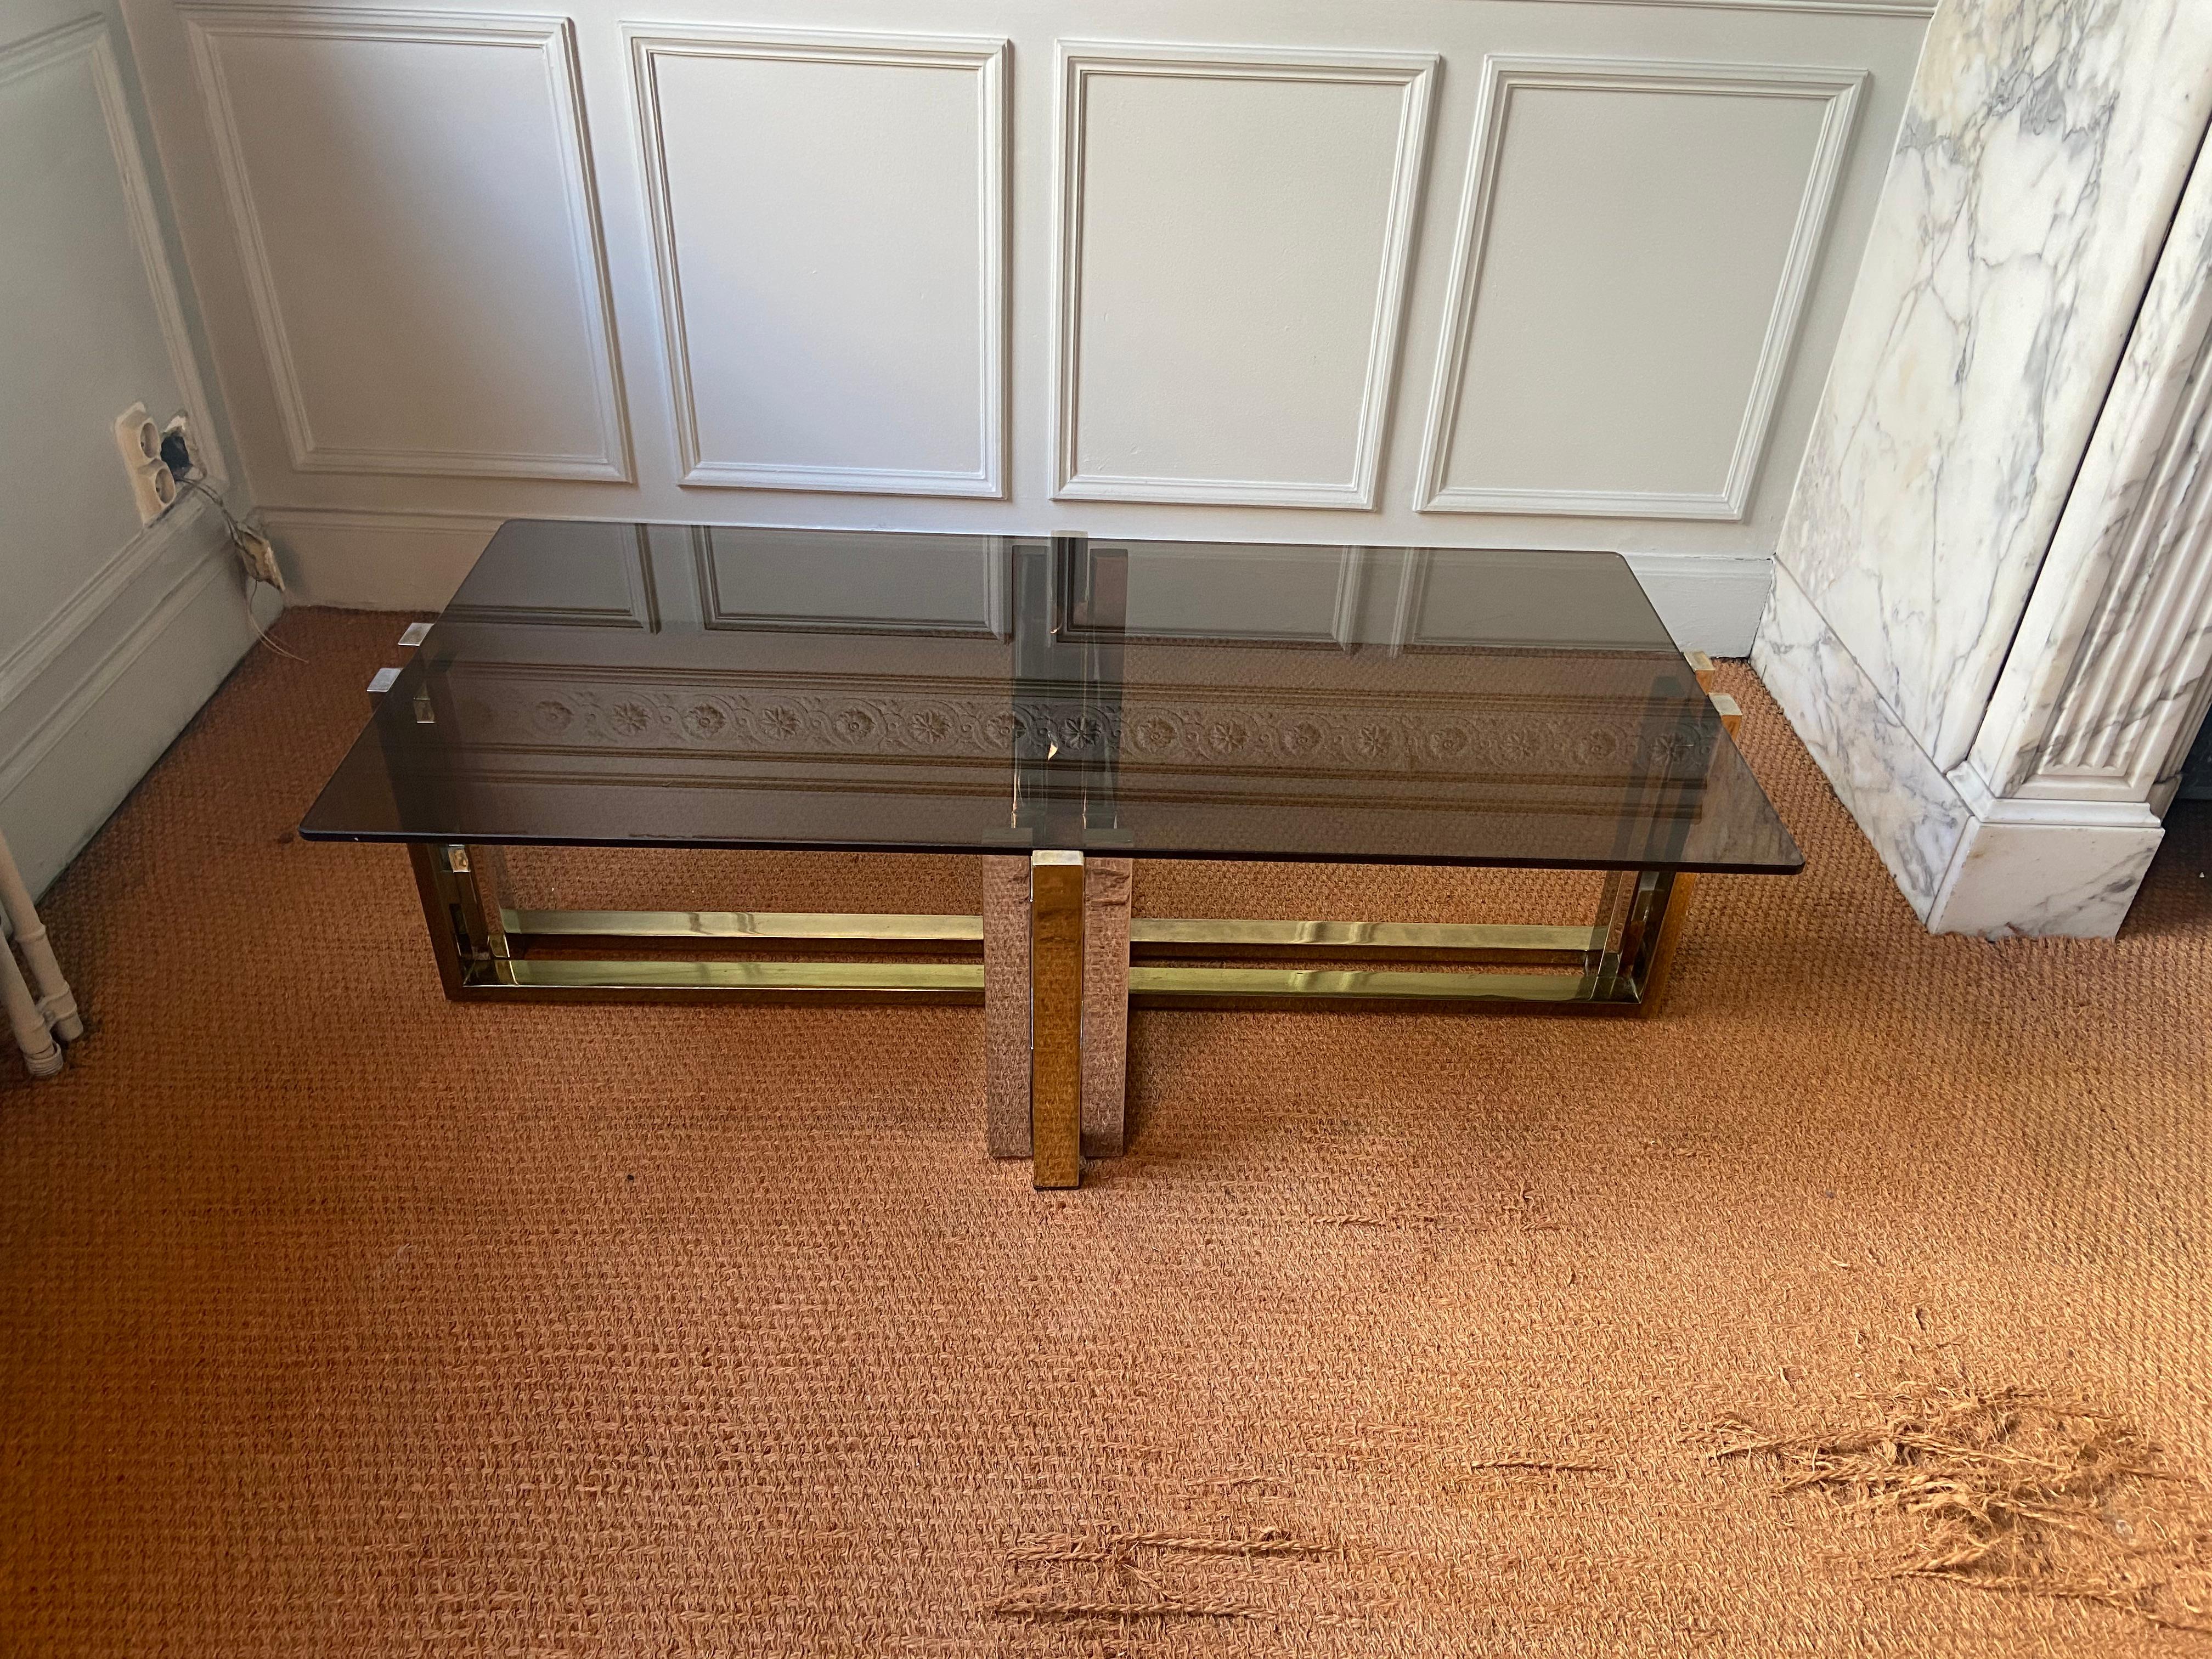 
Coffee table in the style of willy rizzo, belgo chrom or maison charles. Structure in chromed and gilded metal. Smoked glass top. Glass and chrome are in very good condition. Some traces of wear on the gilding as shown in the photos